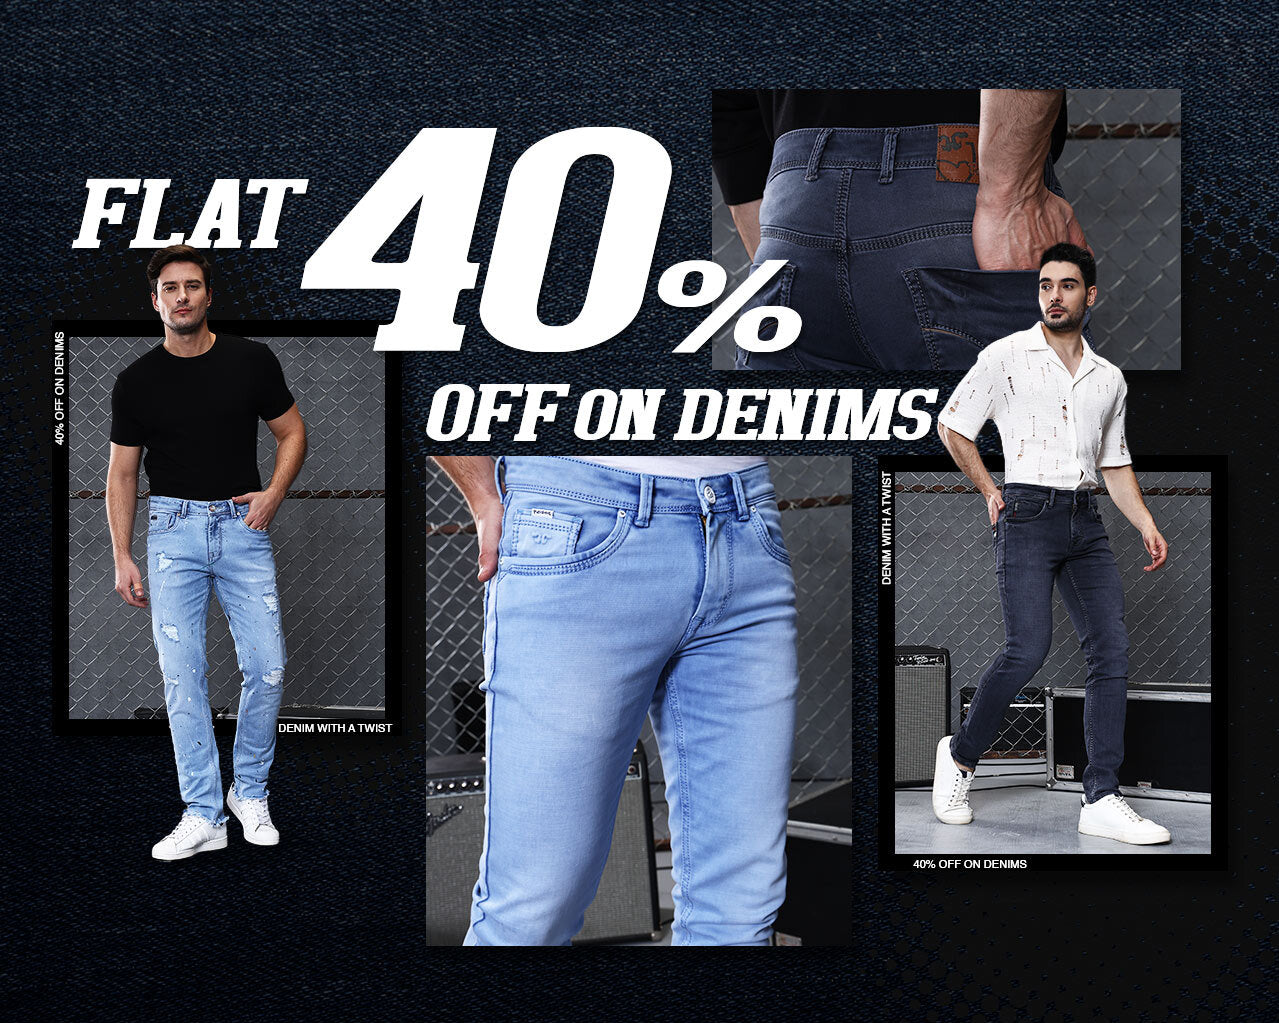 51 get demin jeans Ads to Post for Digital Marketing Success